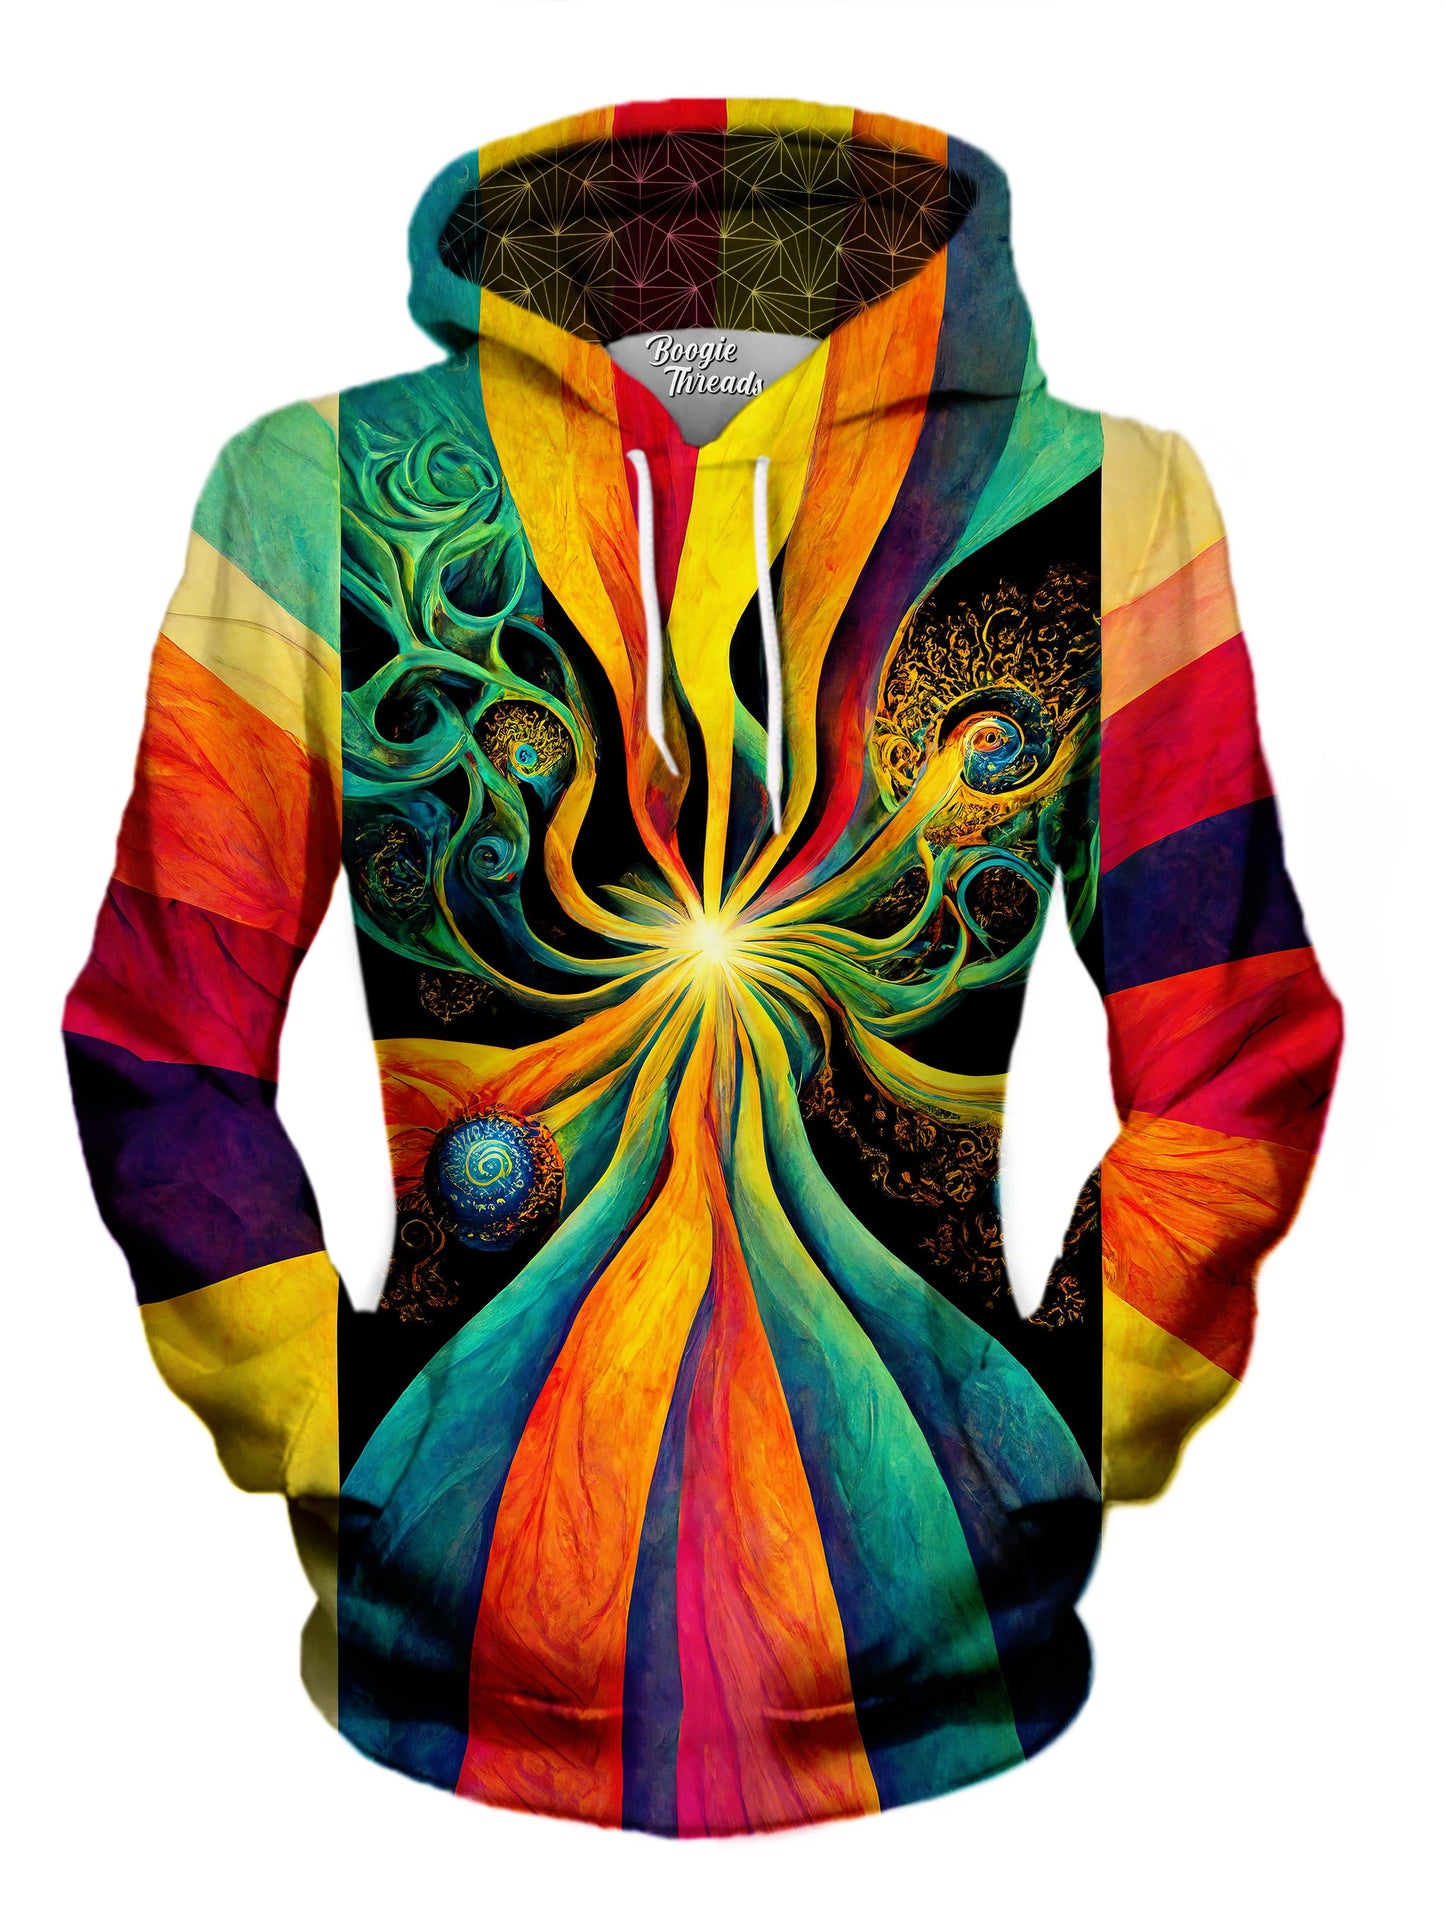 Delightful Moment Unisex Pullover Hoodie - EDM Festival Clothing - Boogie Threads